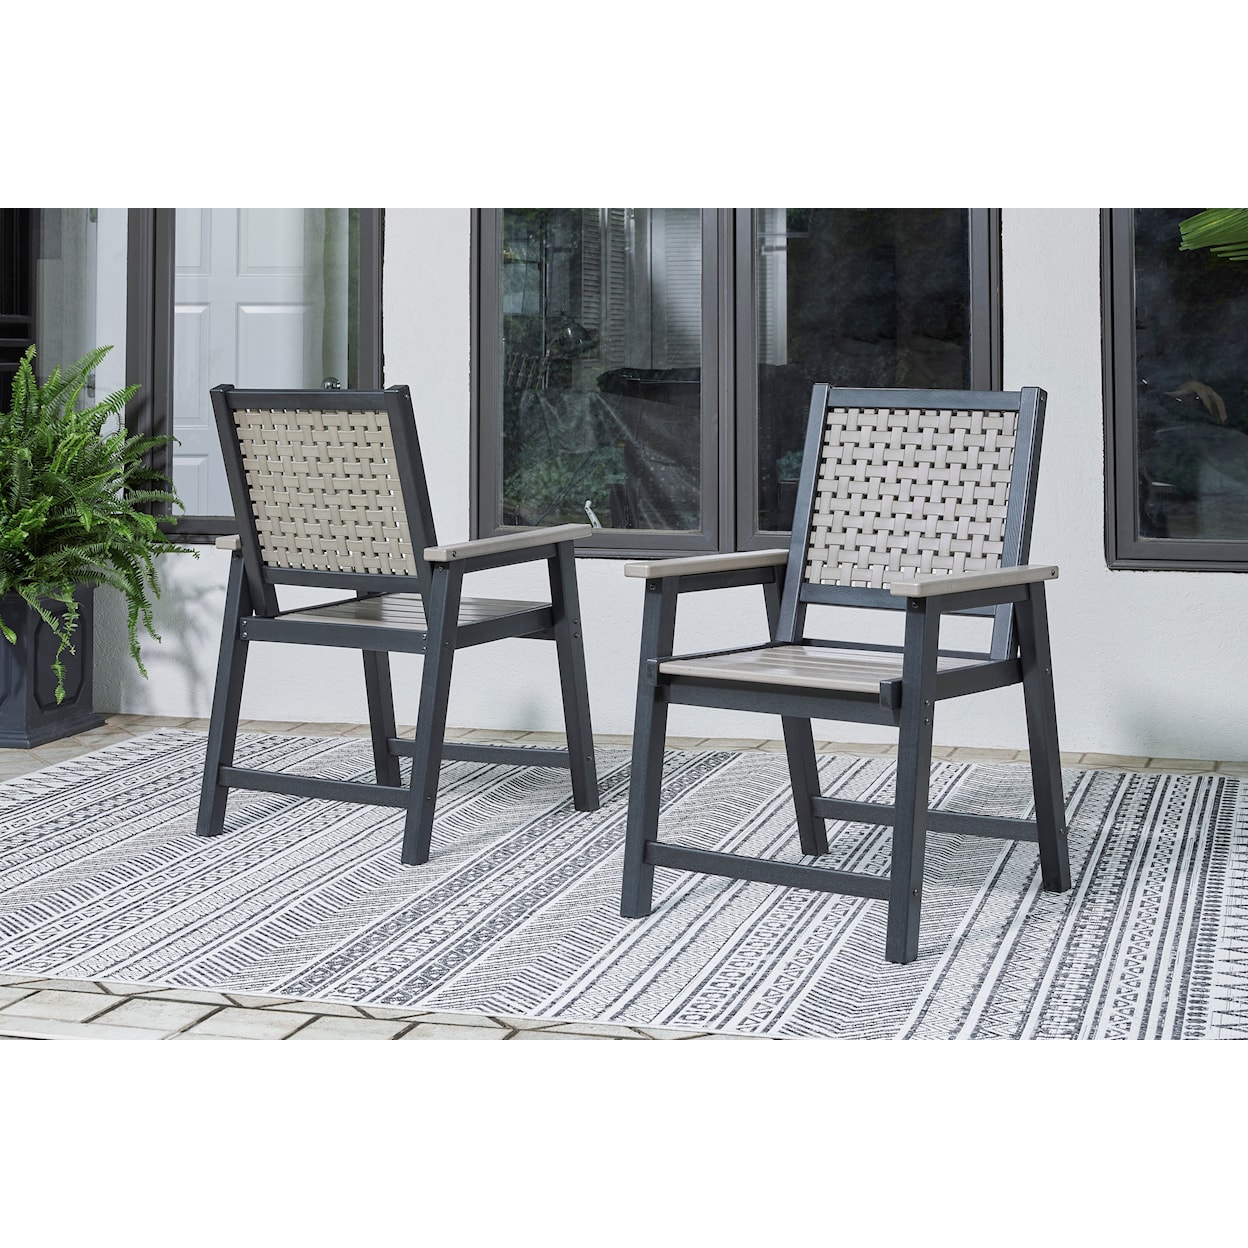 Signature Design by Ashley Mount Valley Outdoor Dining Chair (Set of 2)